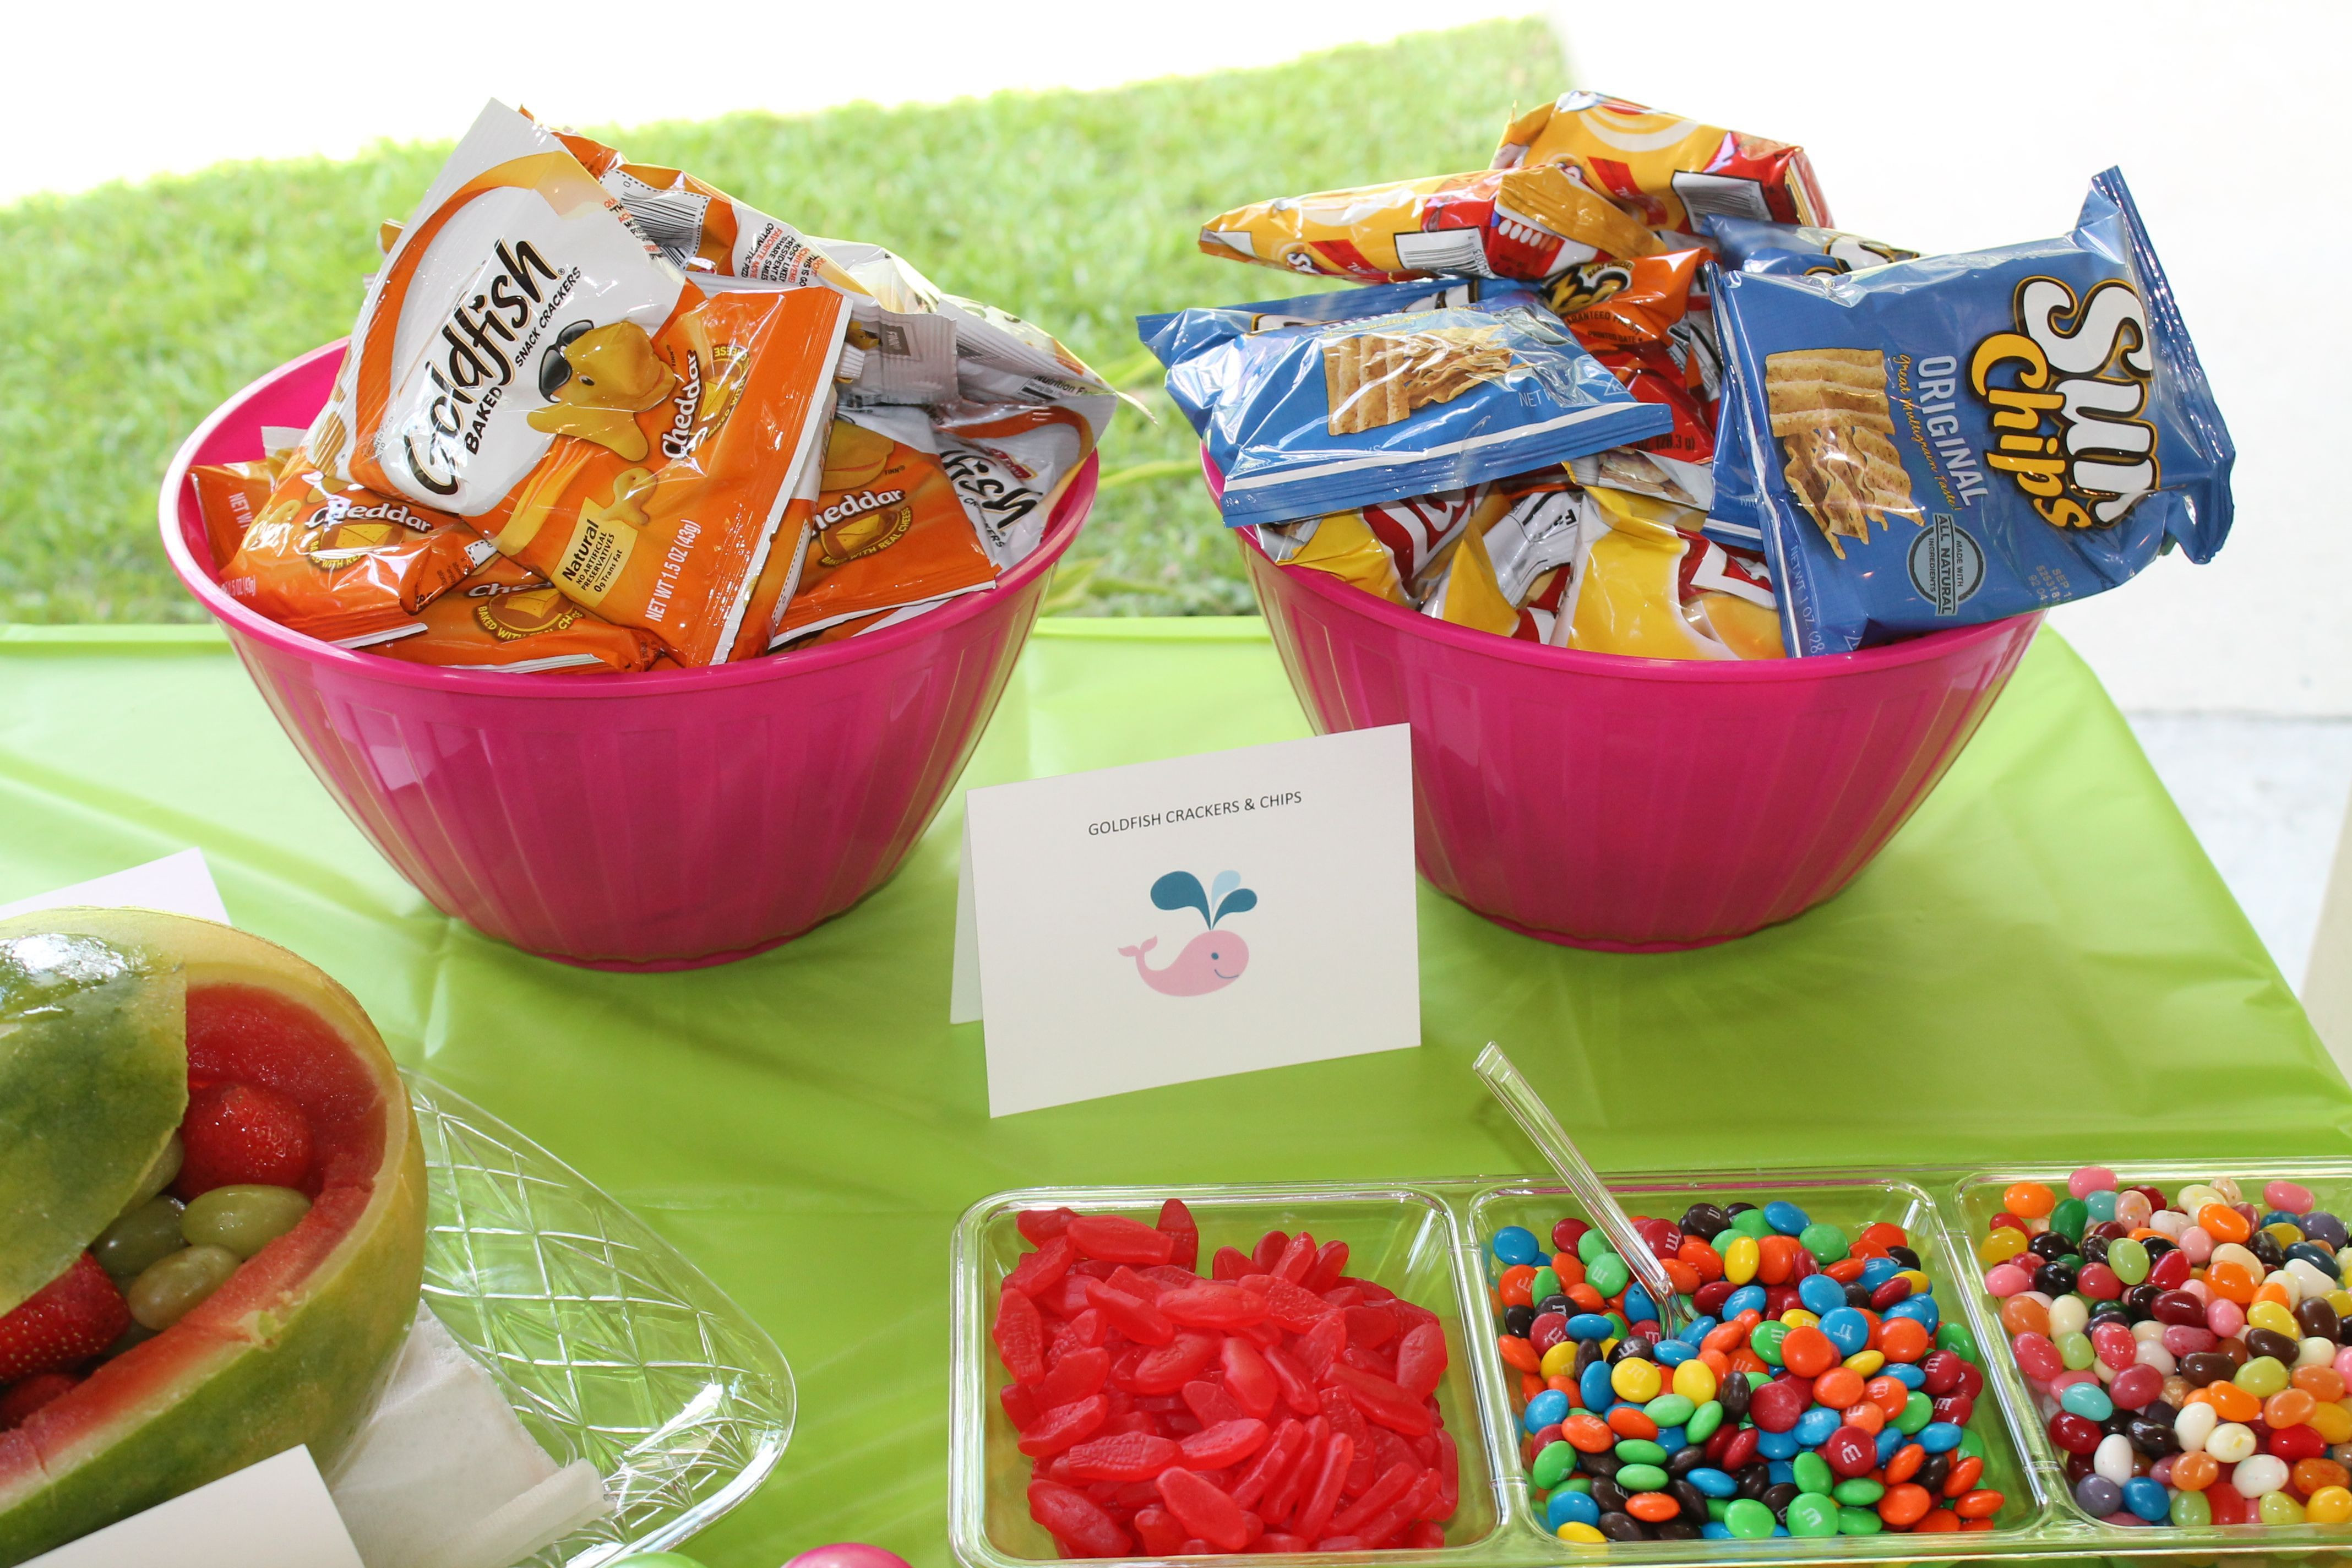 Pool Party Snack Ideas
 Goldfish crackers fit the theme but the chips were more